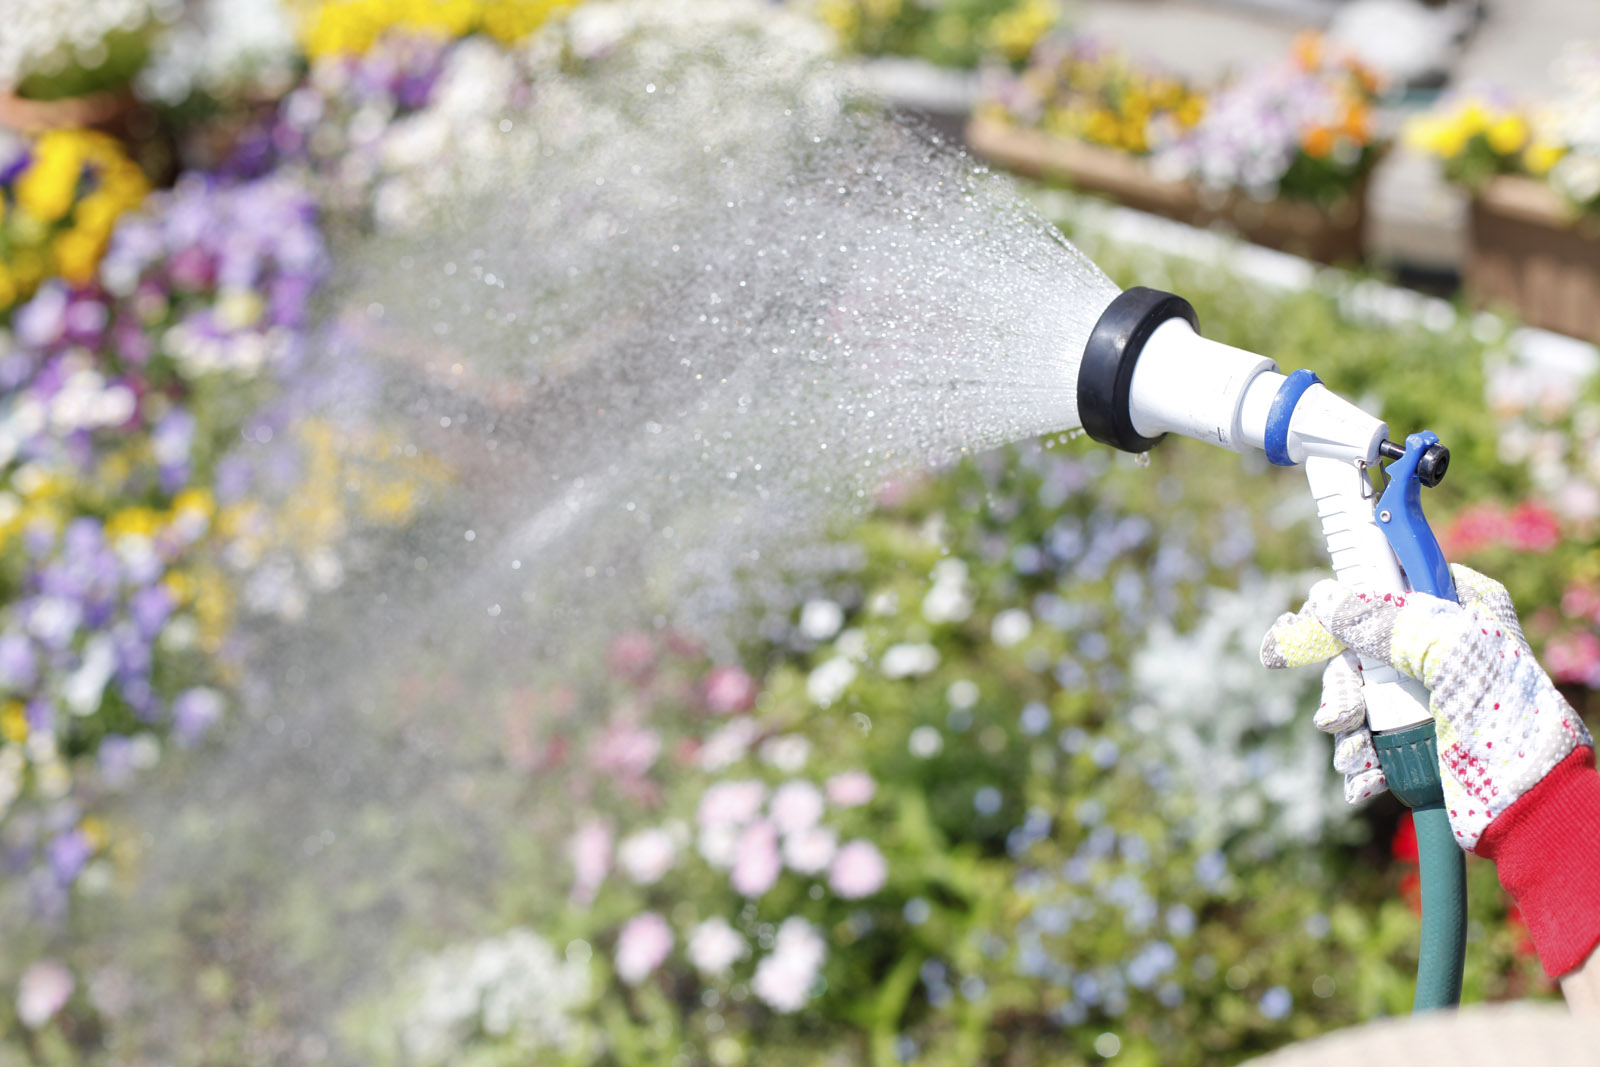 Dry spell: When and how to water spring plants